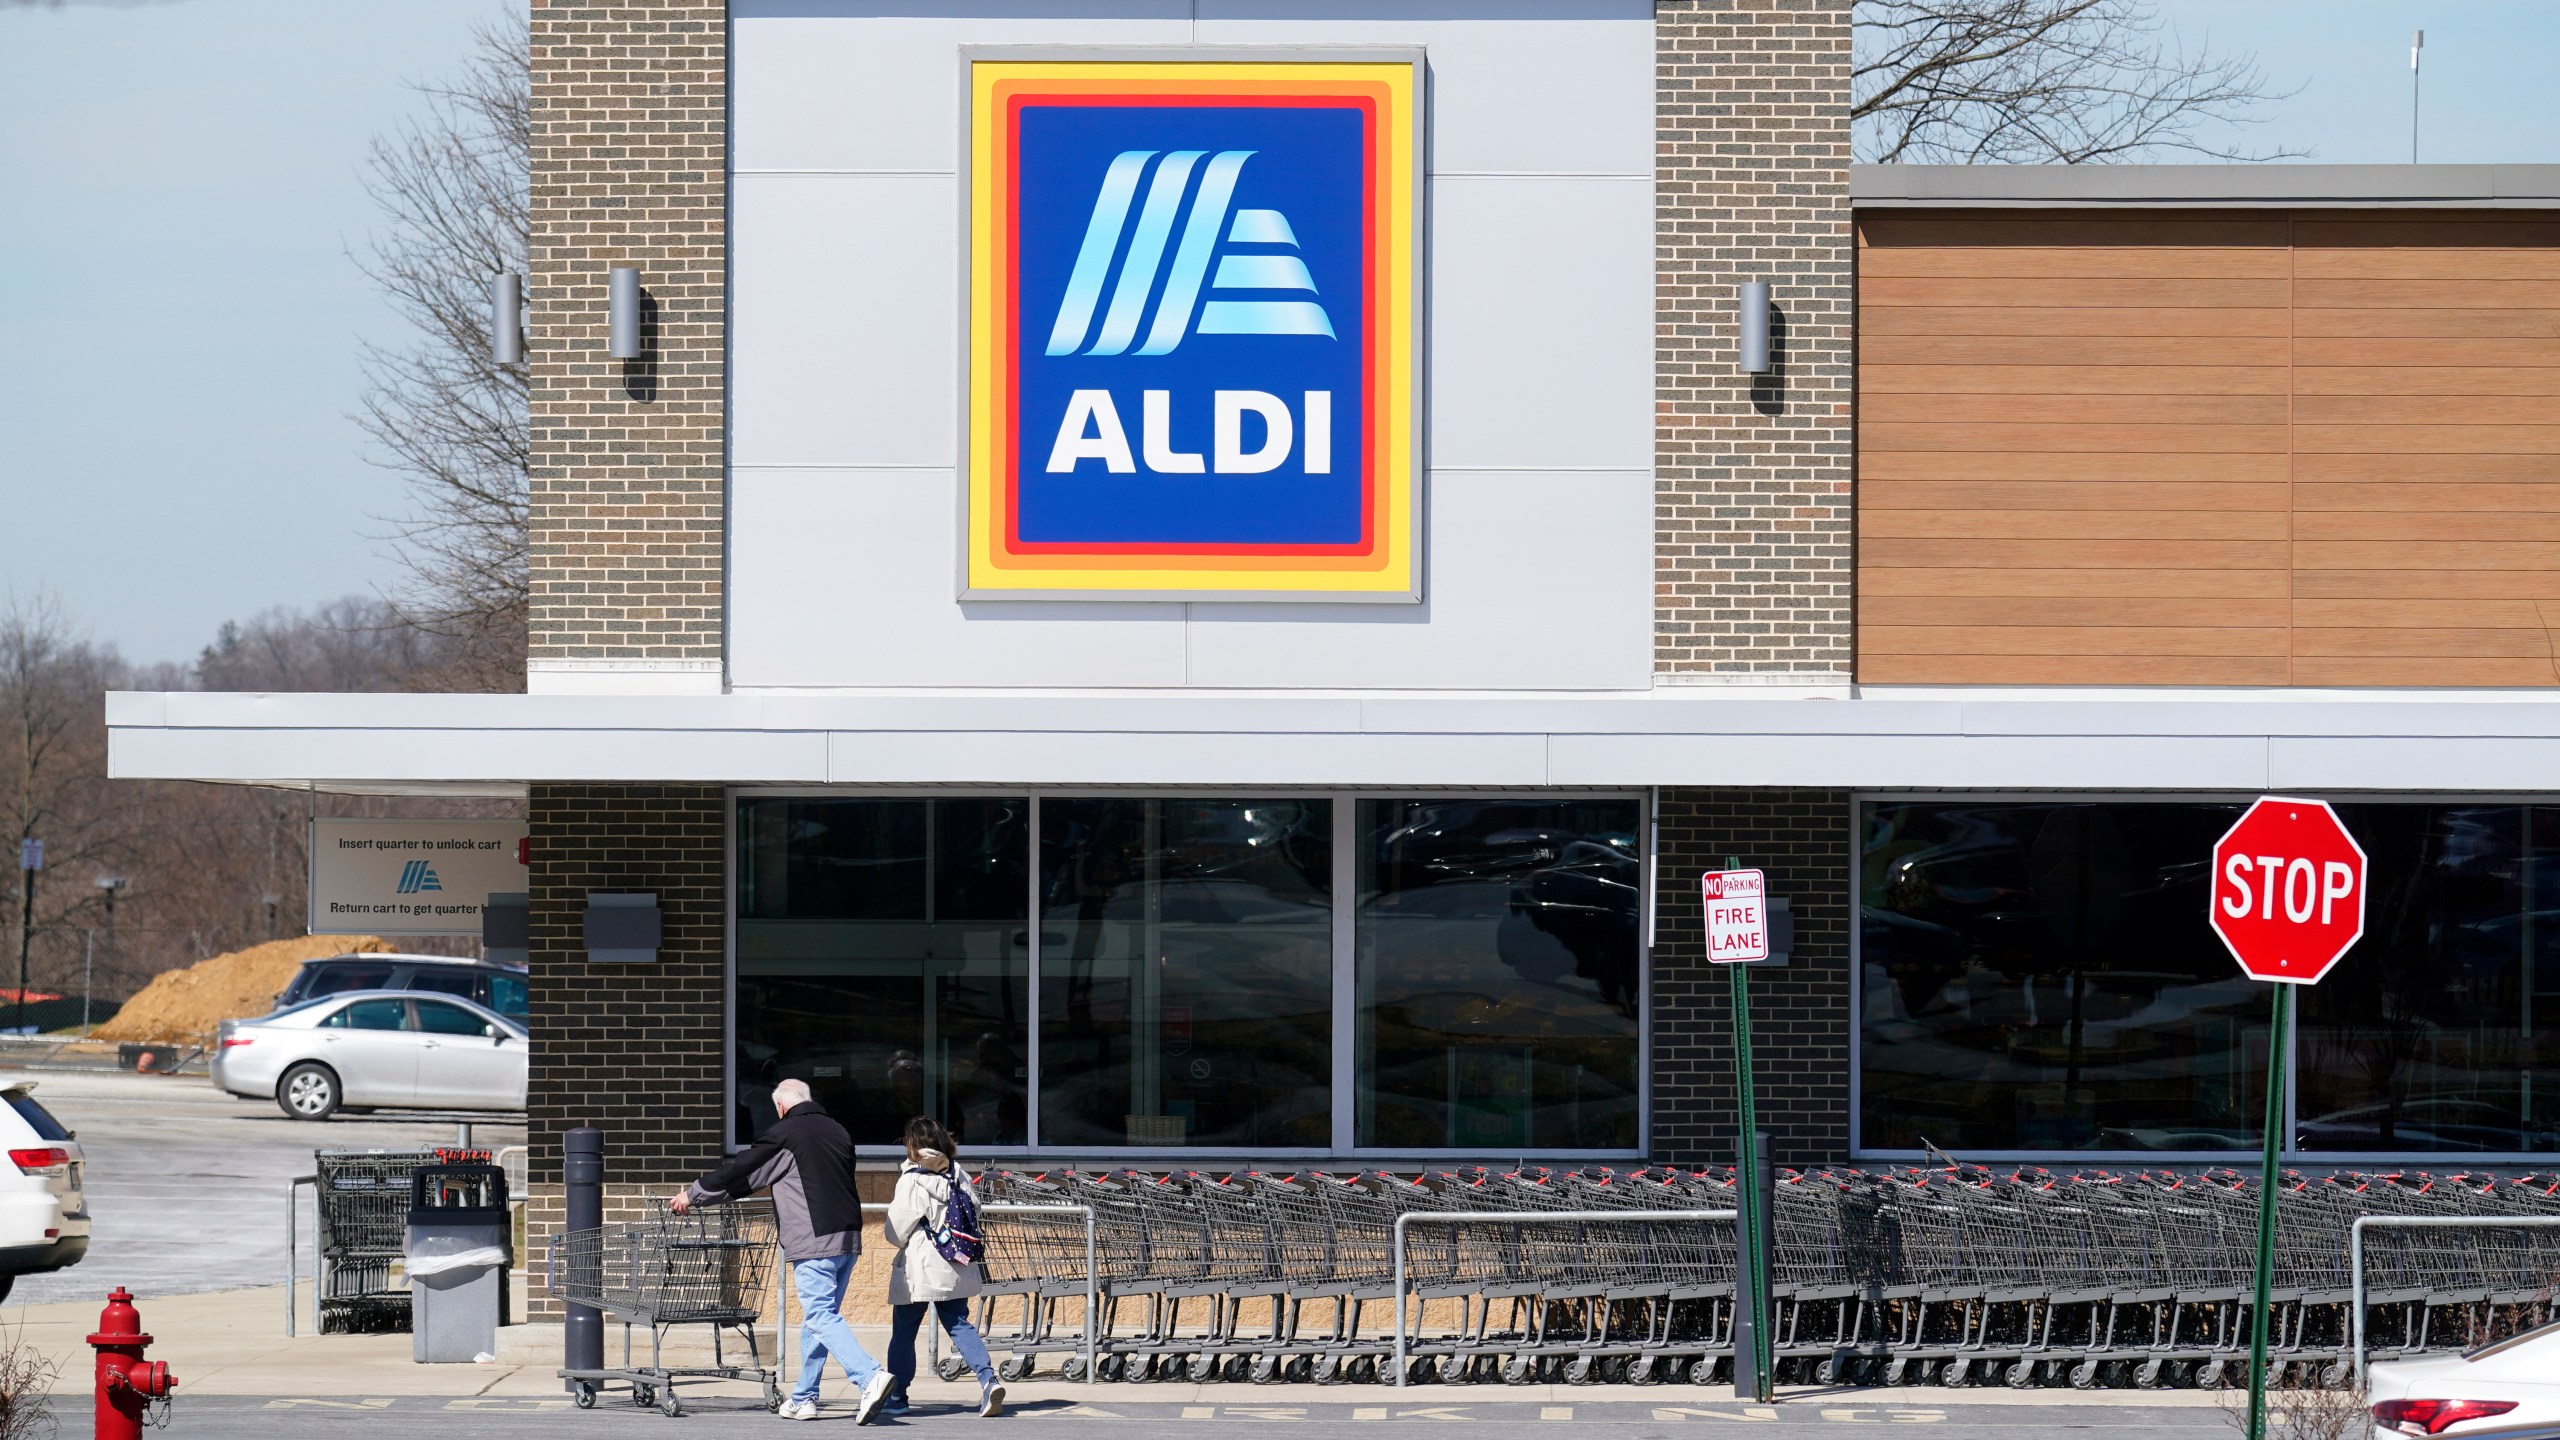 FILE - Customers walk into an Aldi supermarket in Bensalem, Pa., March 14, 2022. Discount grocer Aldi plans to add 800 stores across the U.S. in a five-year expansion plan as it looks to capitalize on cost-conscious Americans feeling the pinch at grocery stores. (AP Photo/Matt Rourke, File)